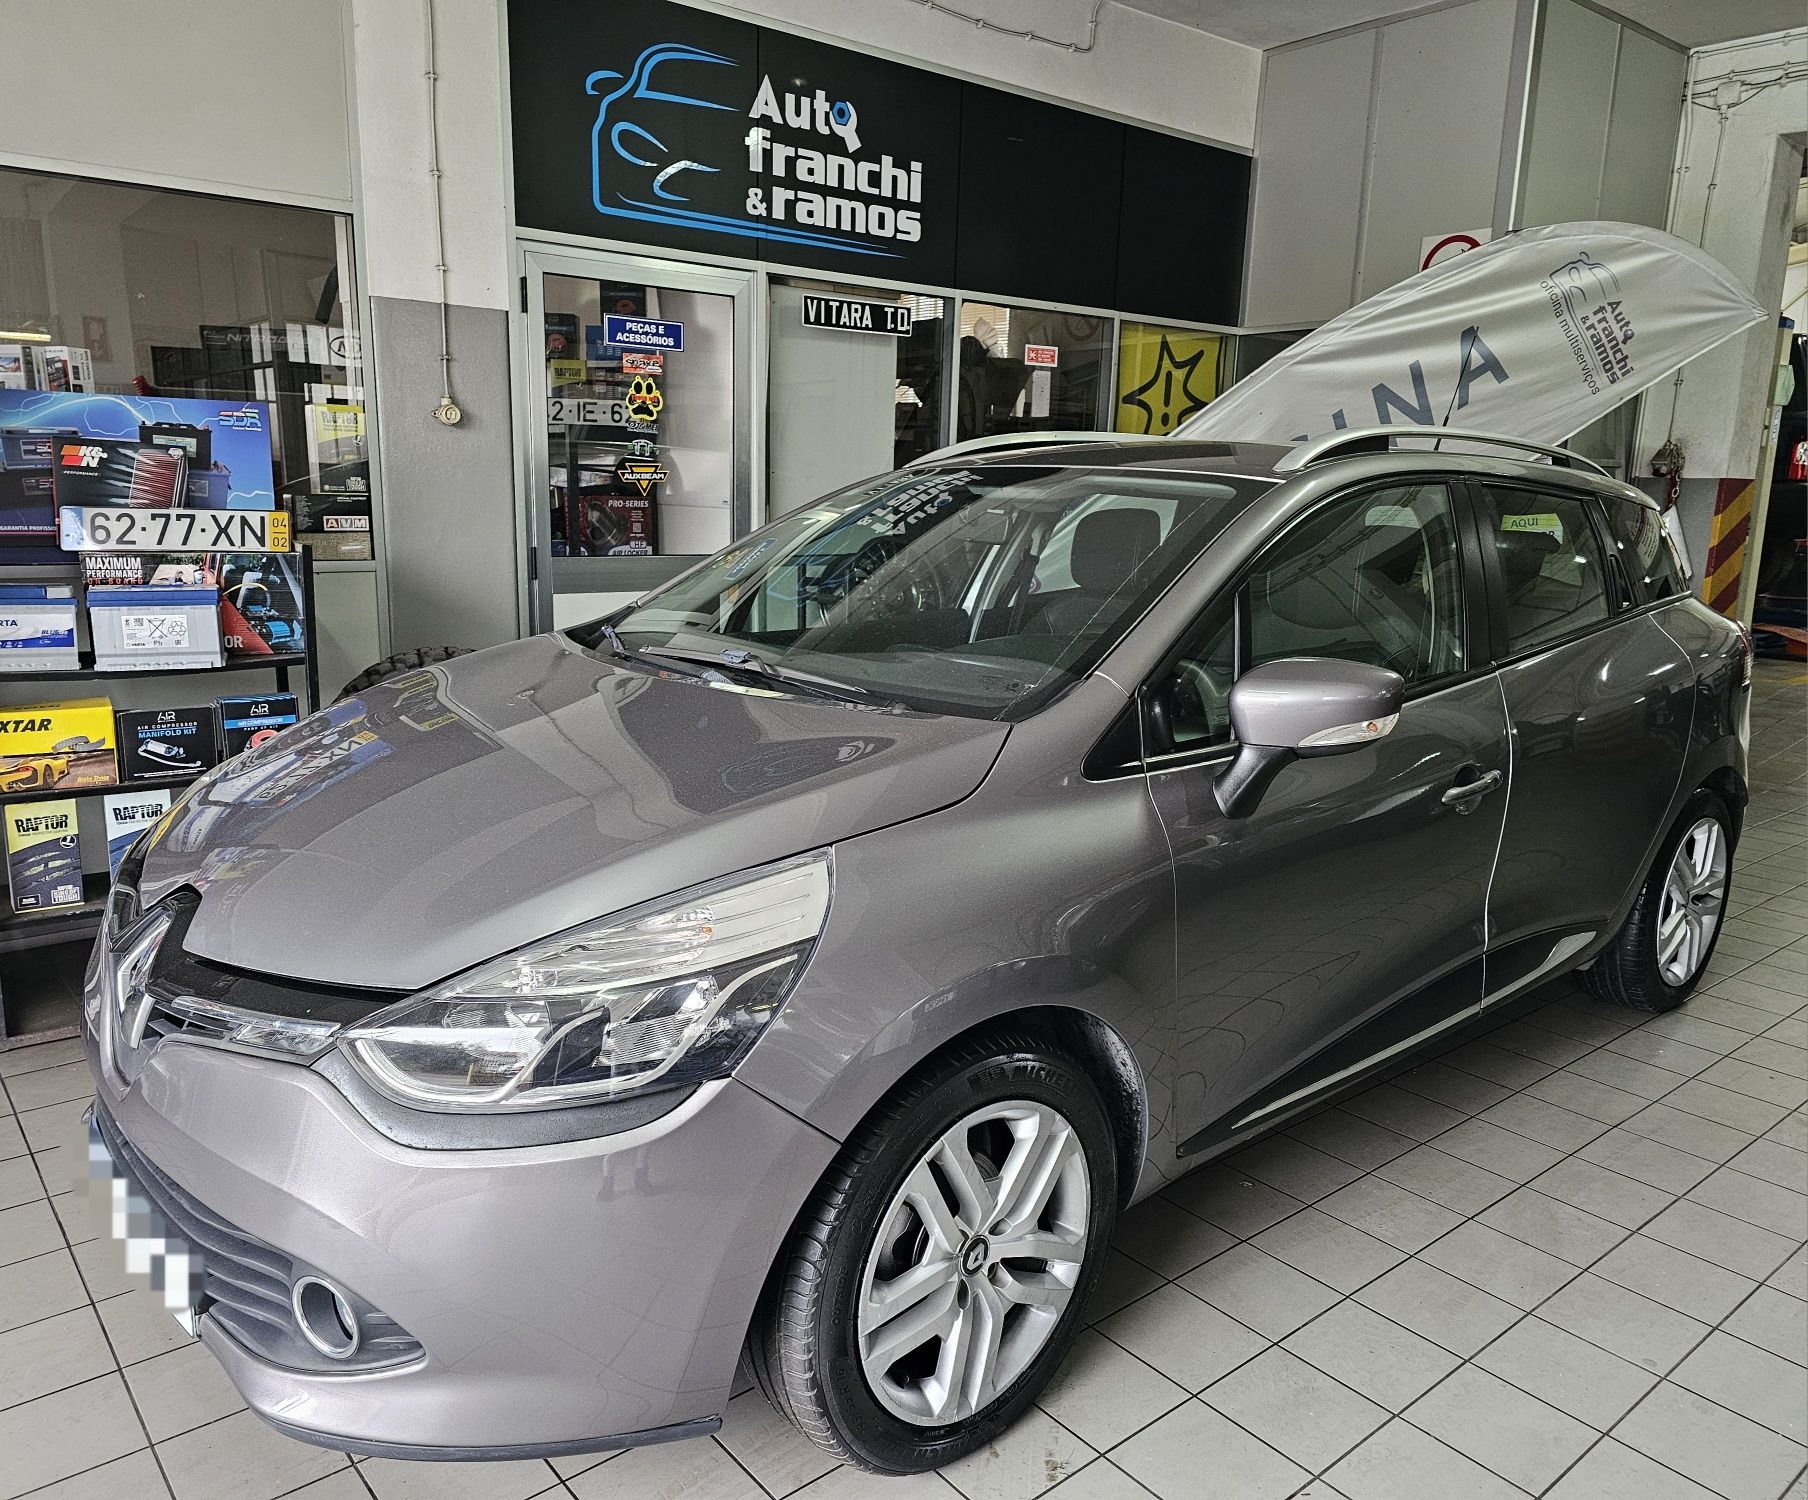 Renault clio IV 2014 1.5 dCi Energy Bussiness Eco2